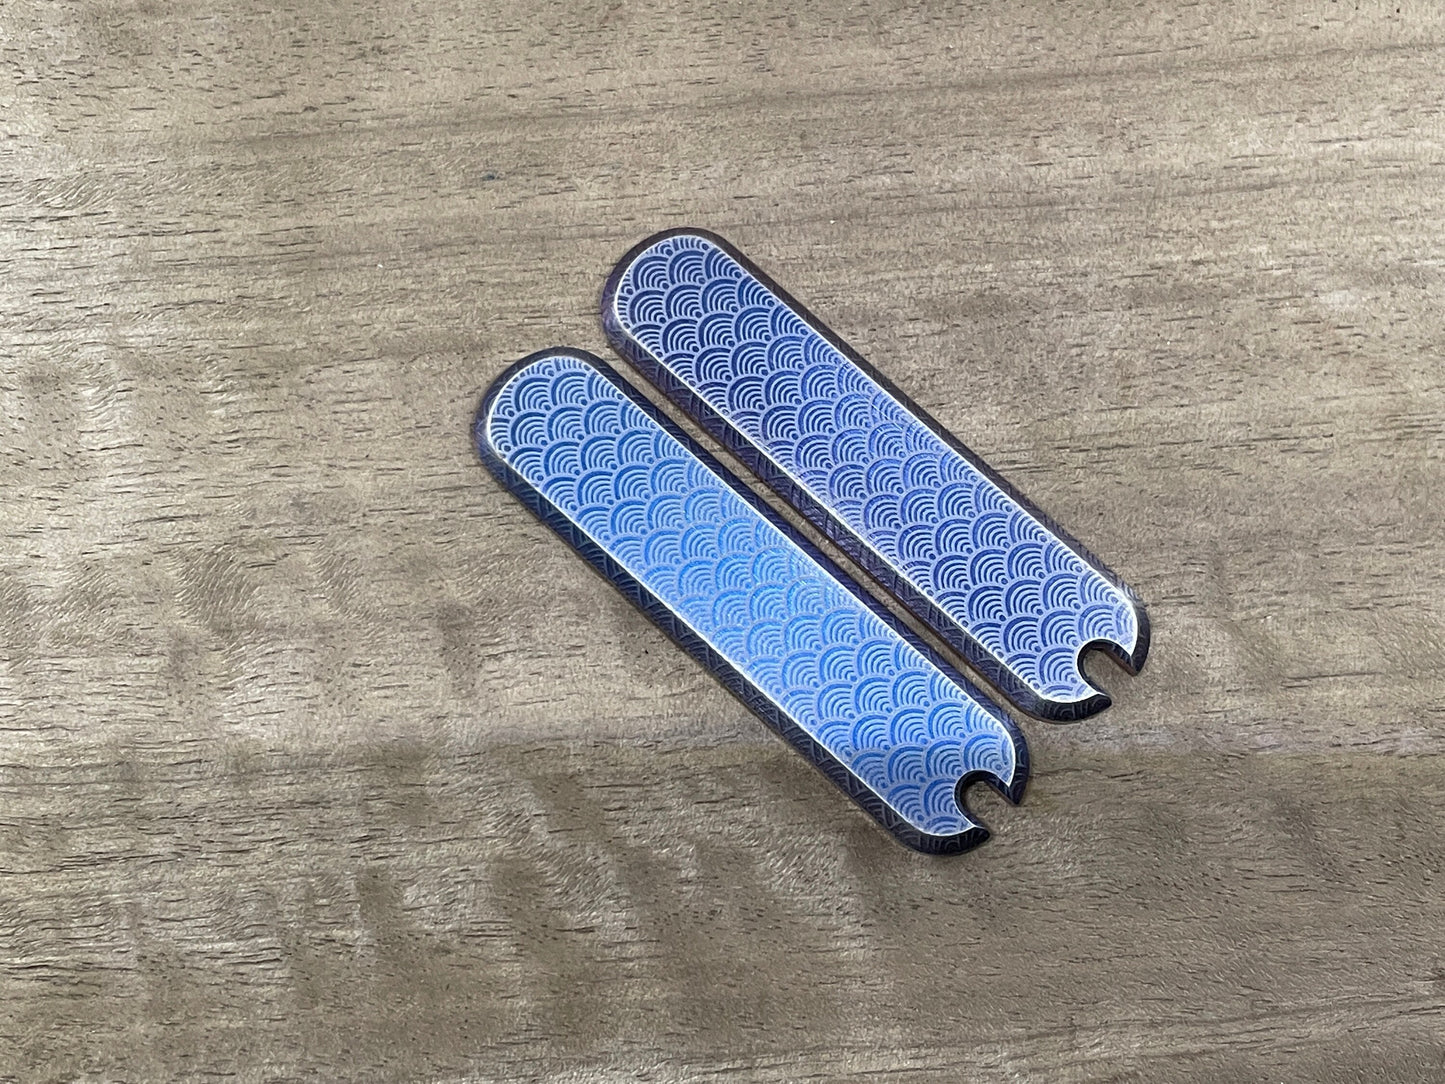 SEIGAIHA Blue ano Brushed 58mm Titanium Scales for Swiss Army SAK